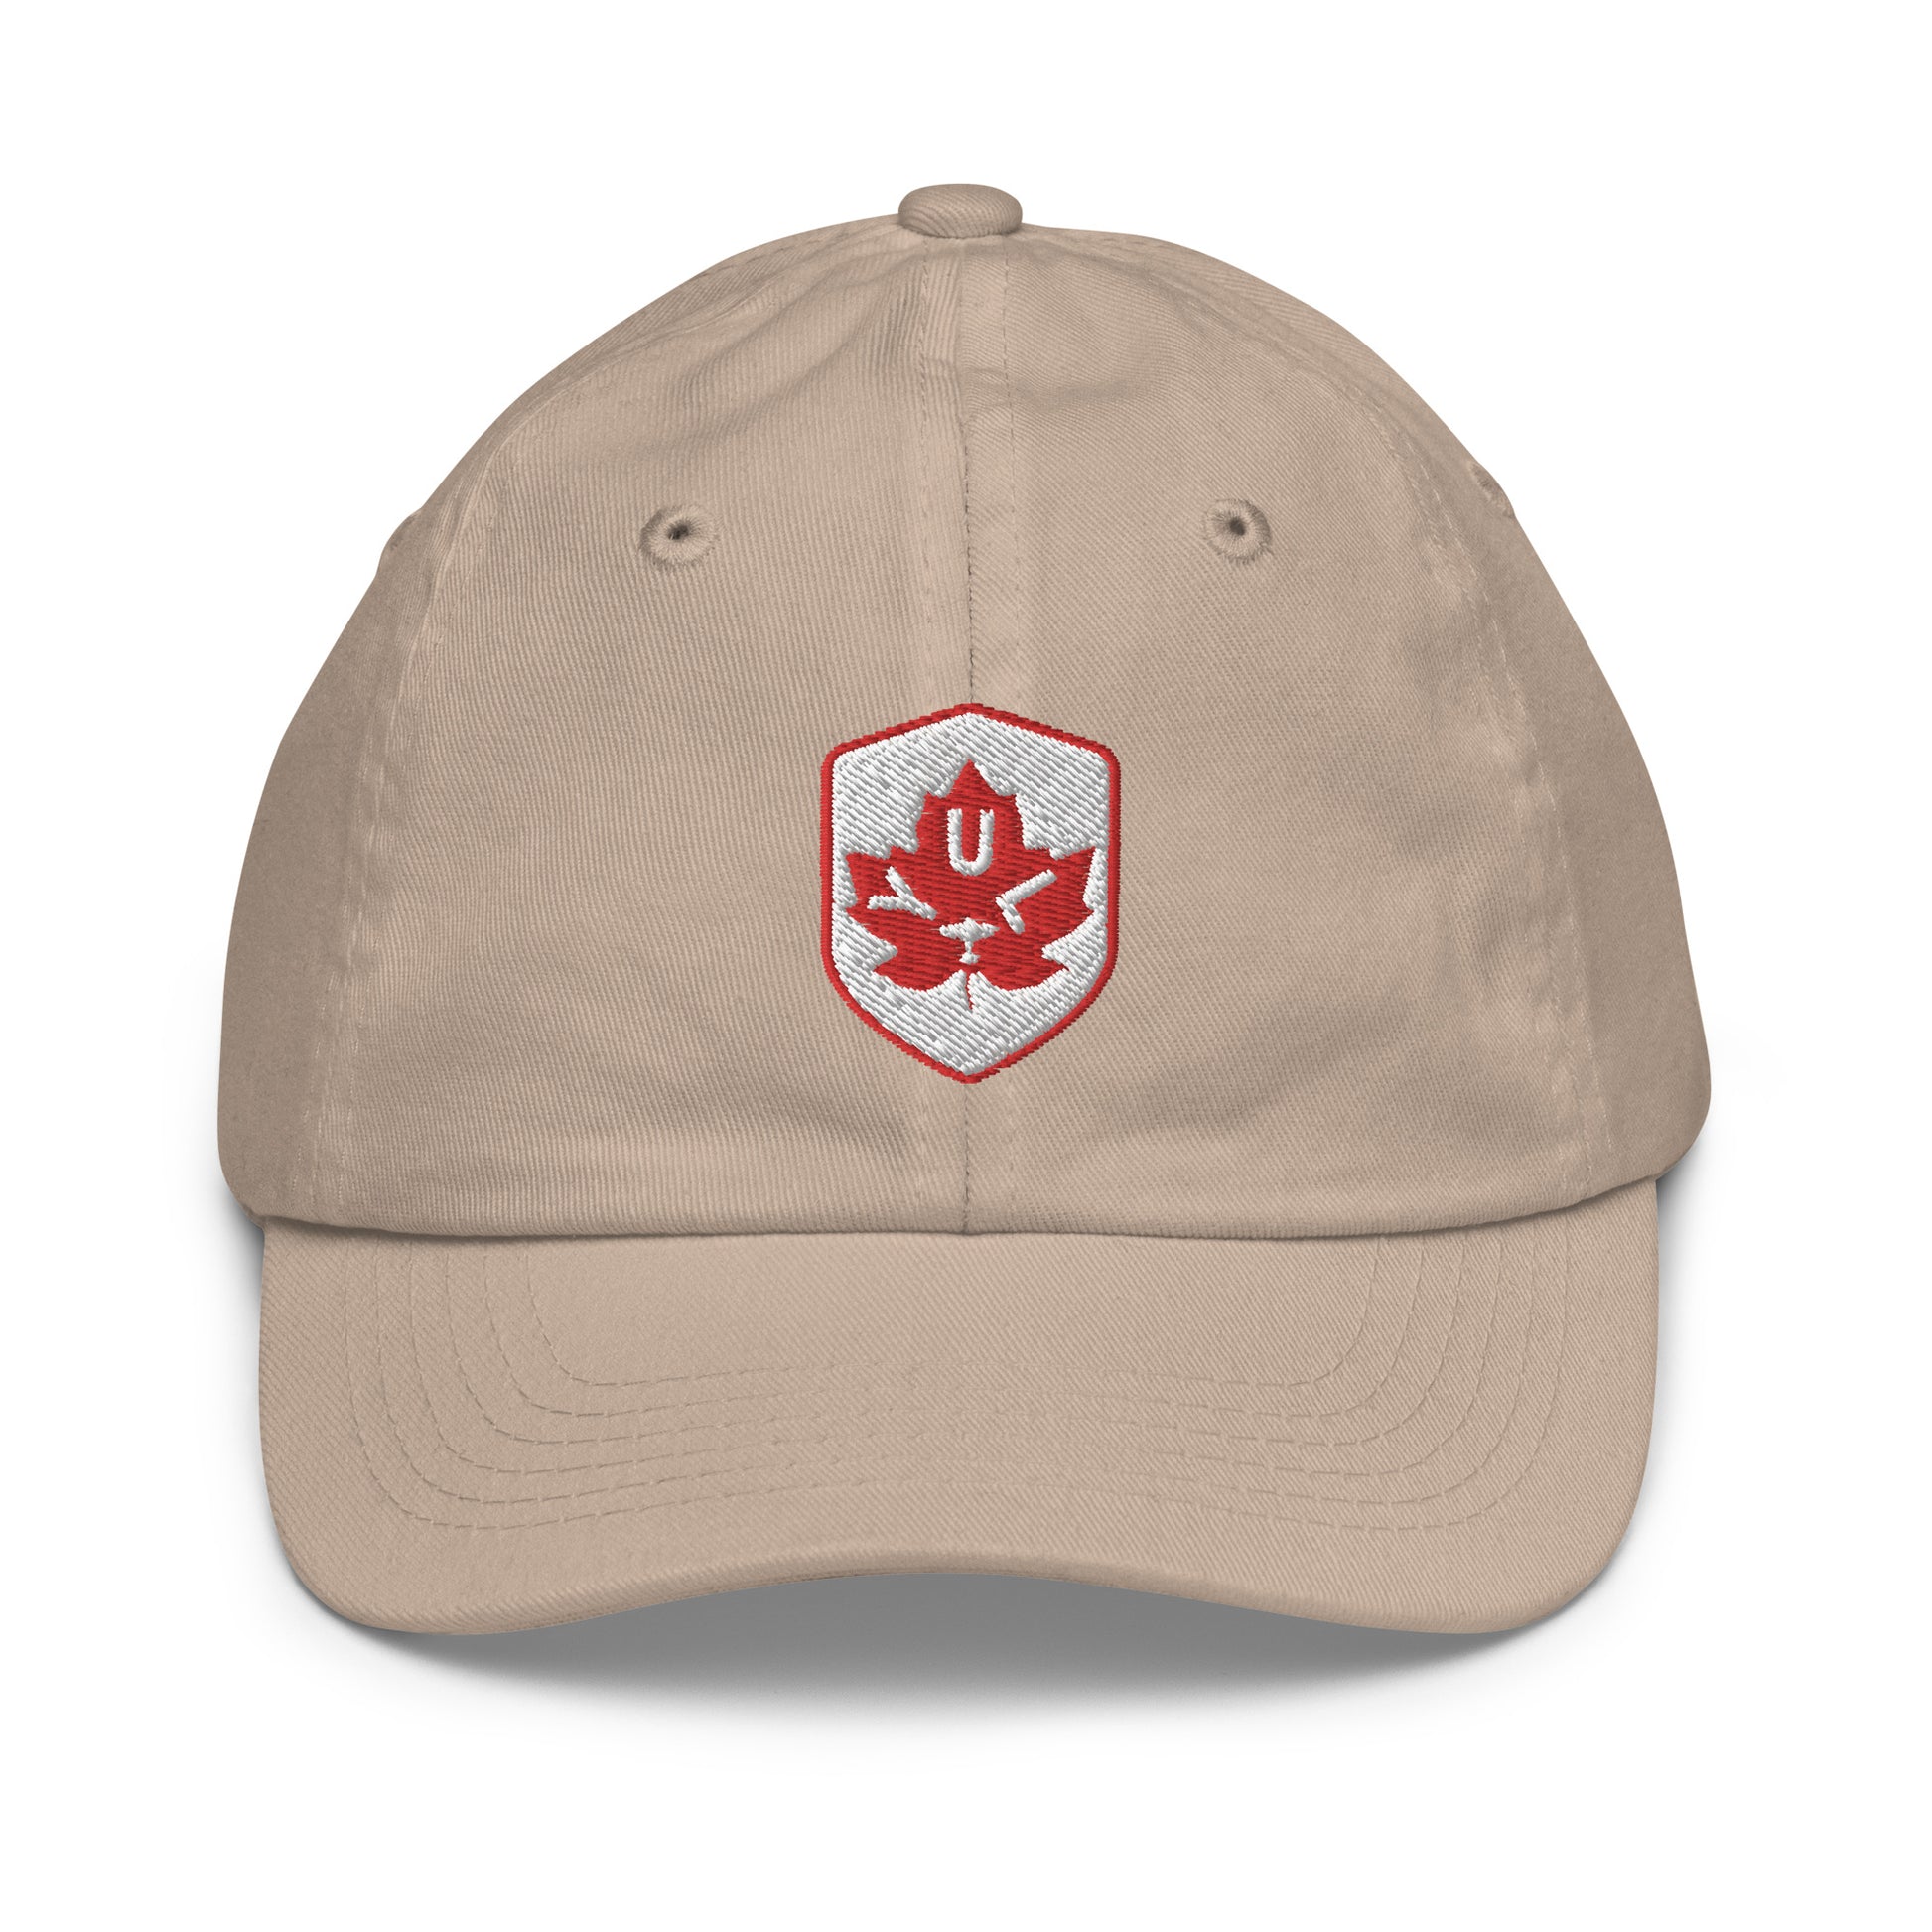 Maple Leaf Kid's Cap - Red/White • YUL Montreal • YHM Designs - Image 02